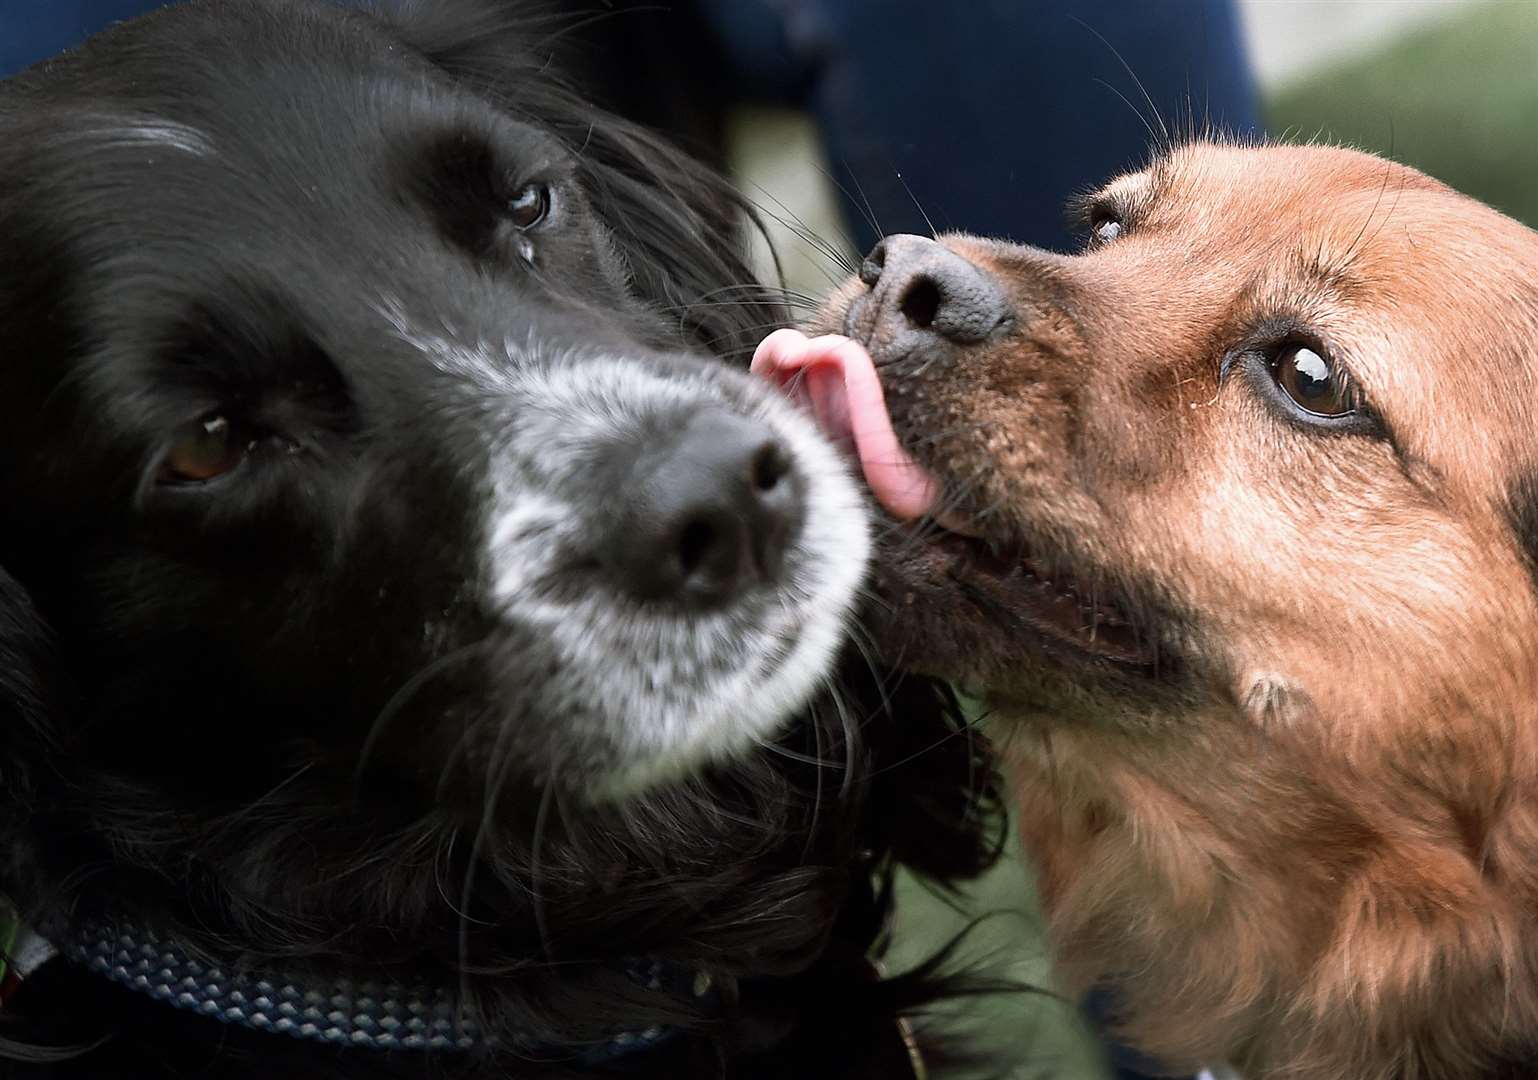 To reduce territorial aggression, permit your older dog and puppy to meet in a neutral place and allow them to sniff each other. Stock Image